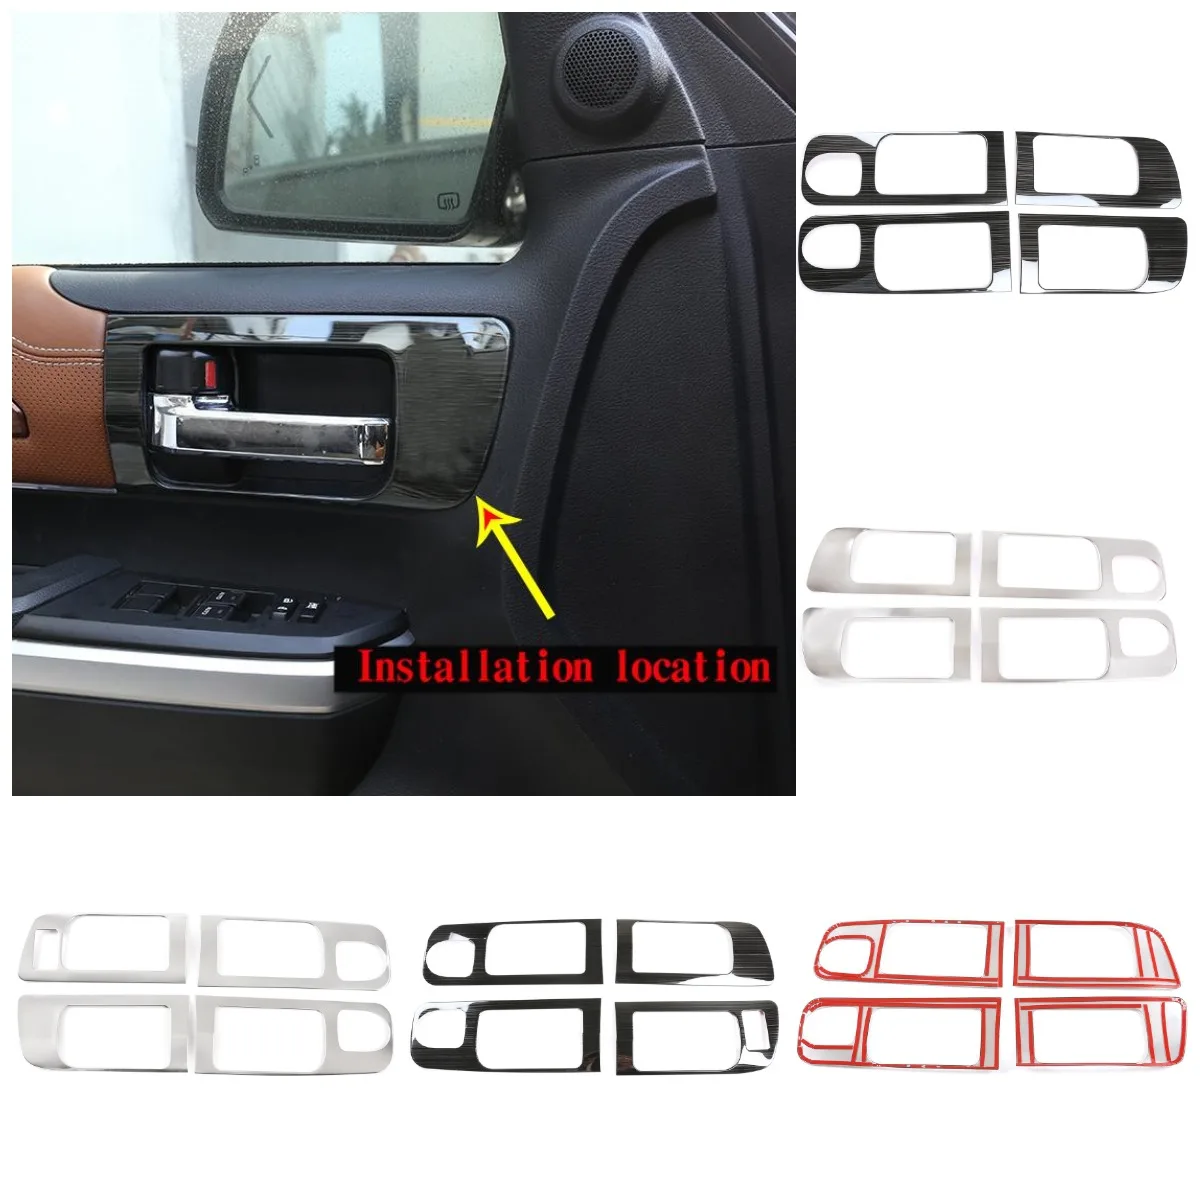 

Stainless Steel Car Interior Door Handle Frame Trim For Toyota Tundra 2014-2021 Black Titanium Chrome Casing Decorate Styling